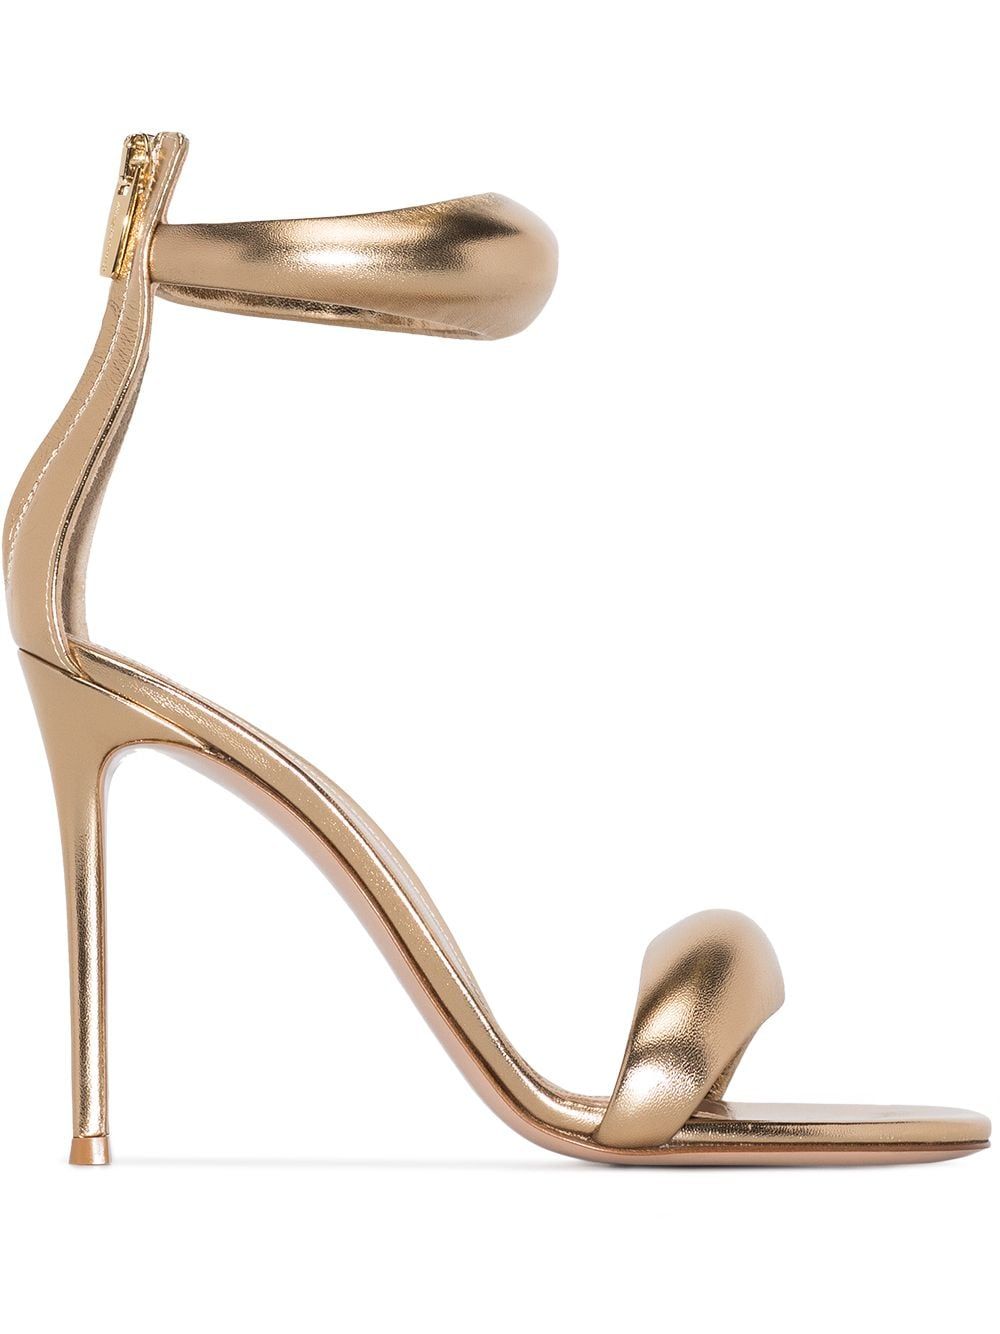 GIANVITO ROSSI Laminated Leather Bijoux Sandals for Women